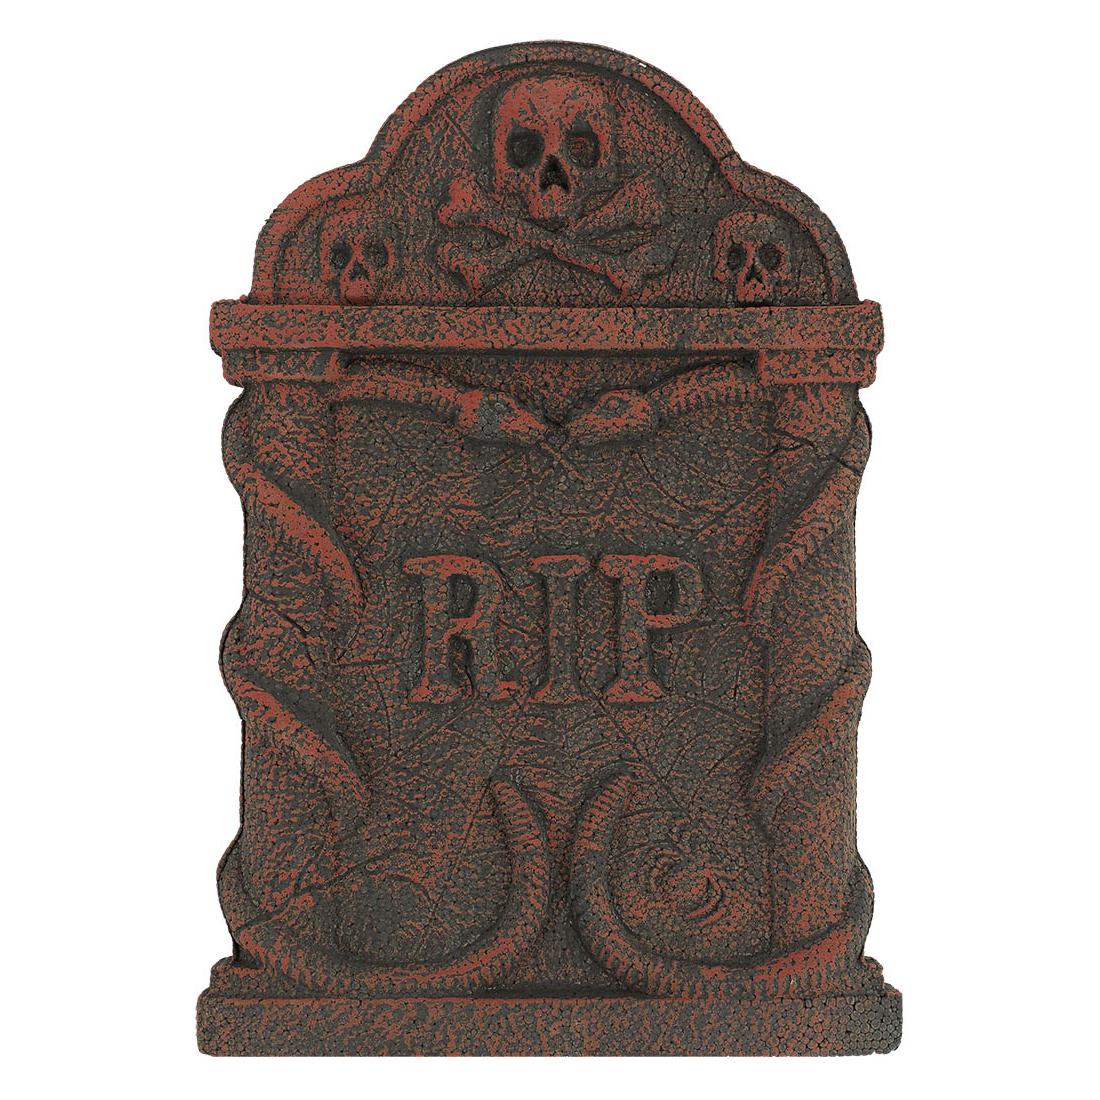 Spooky Snakes Tombstone Decorations - Party Centre